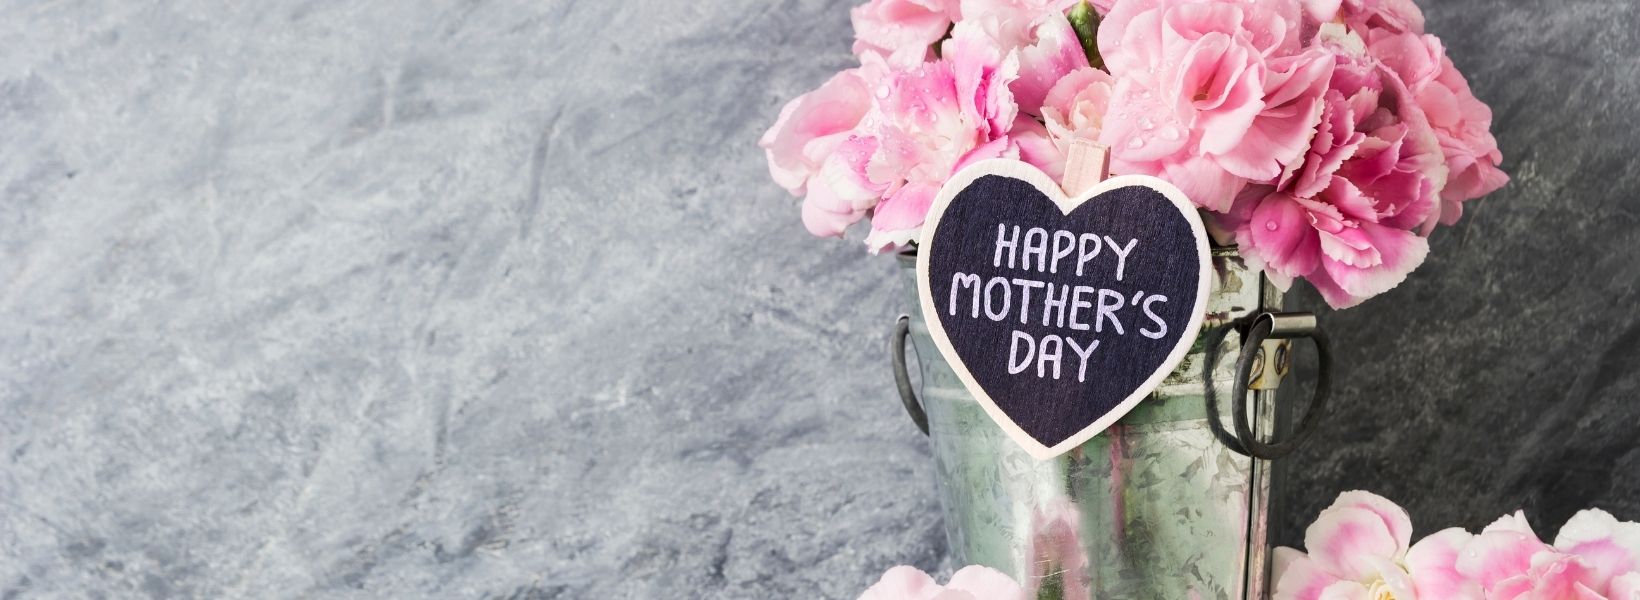 Mother's Day Gift Guide 2021